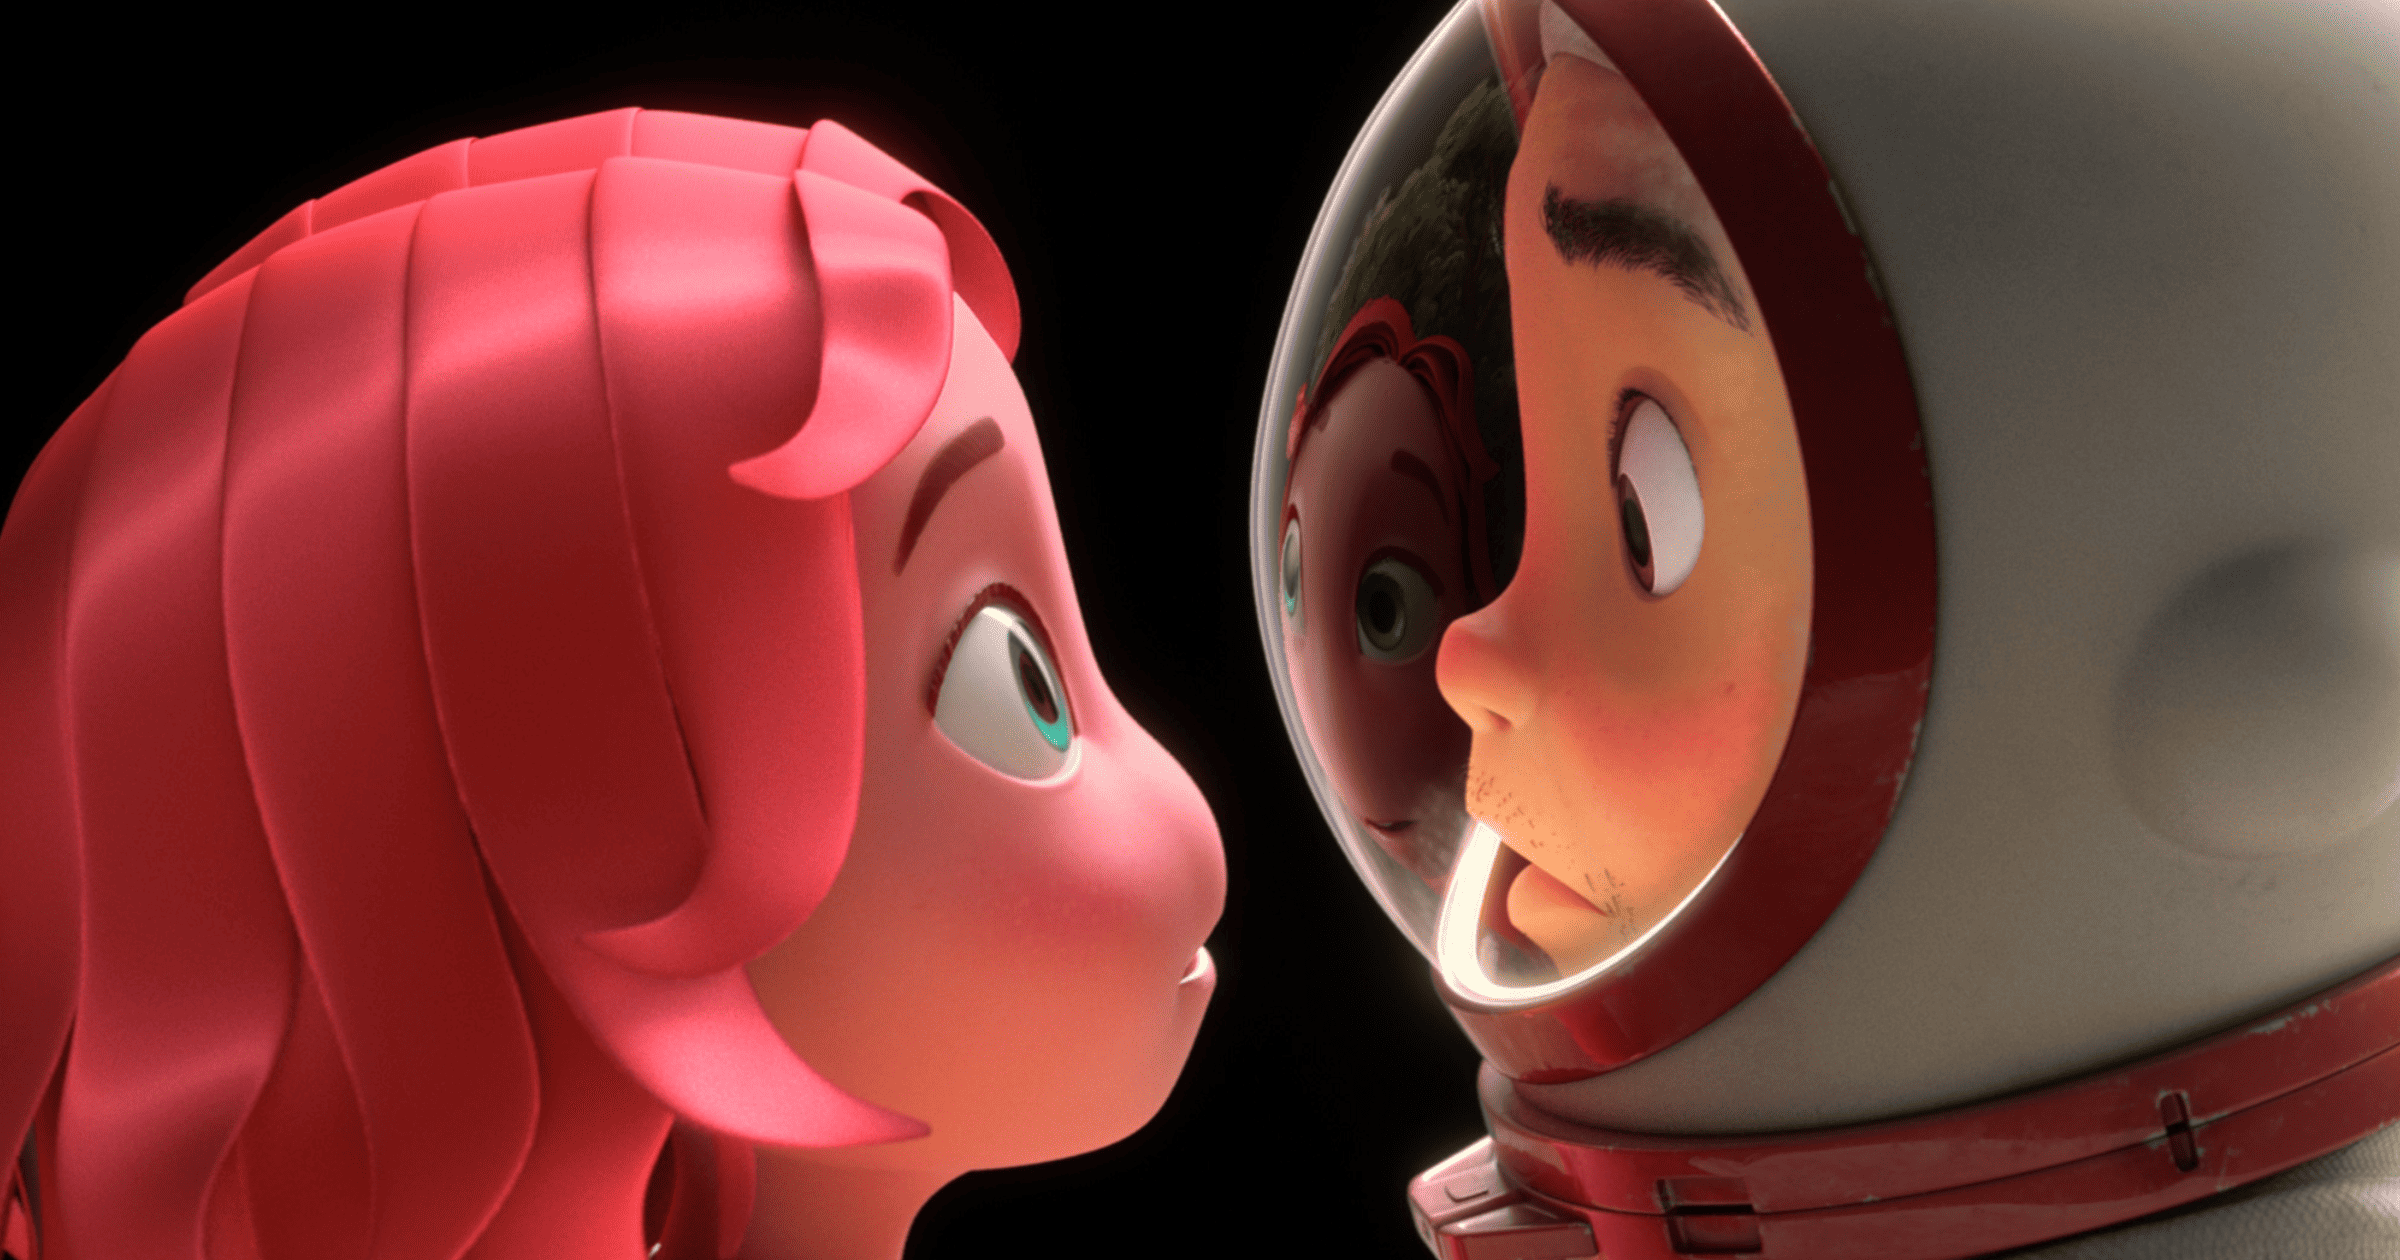 Apple Partners with Pixar’s Story Master for Animated Short ‘Blush’